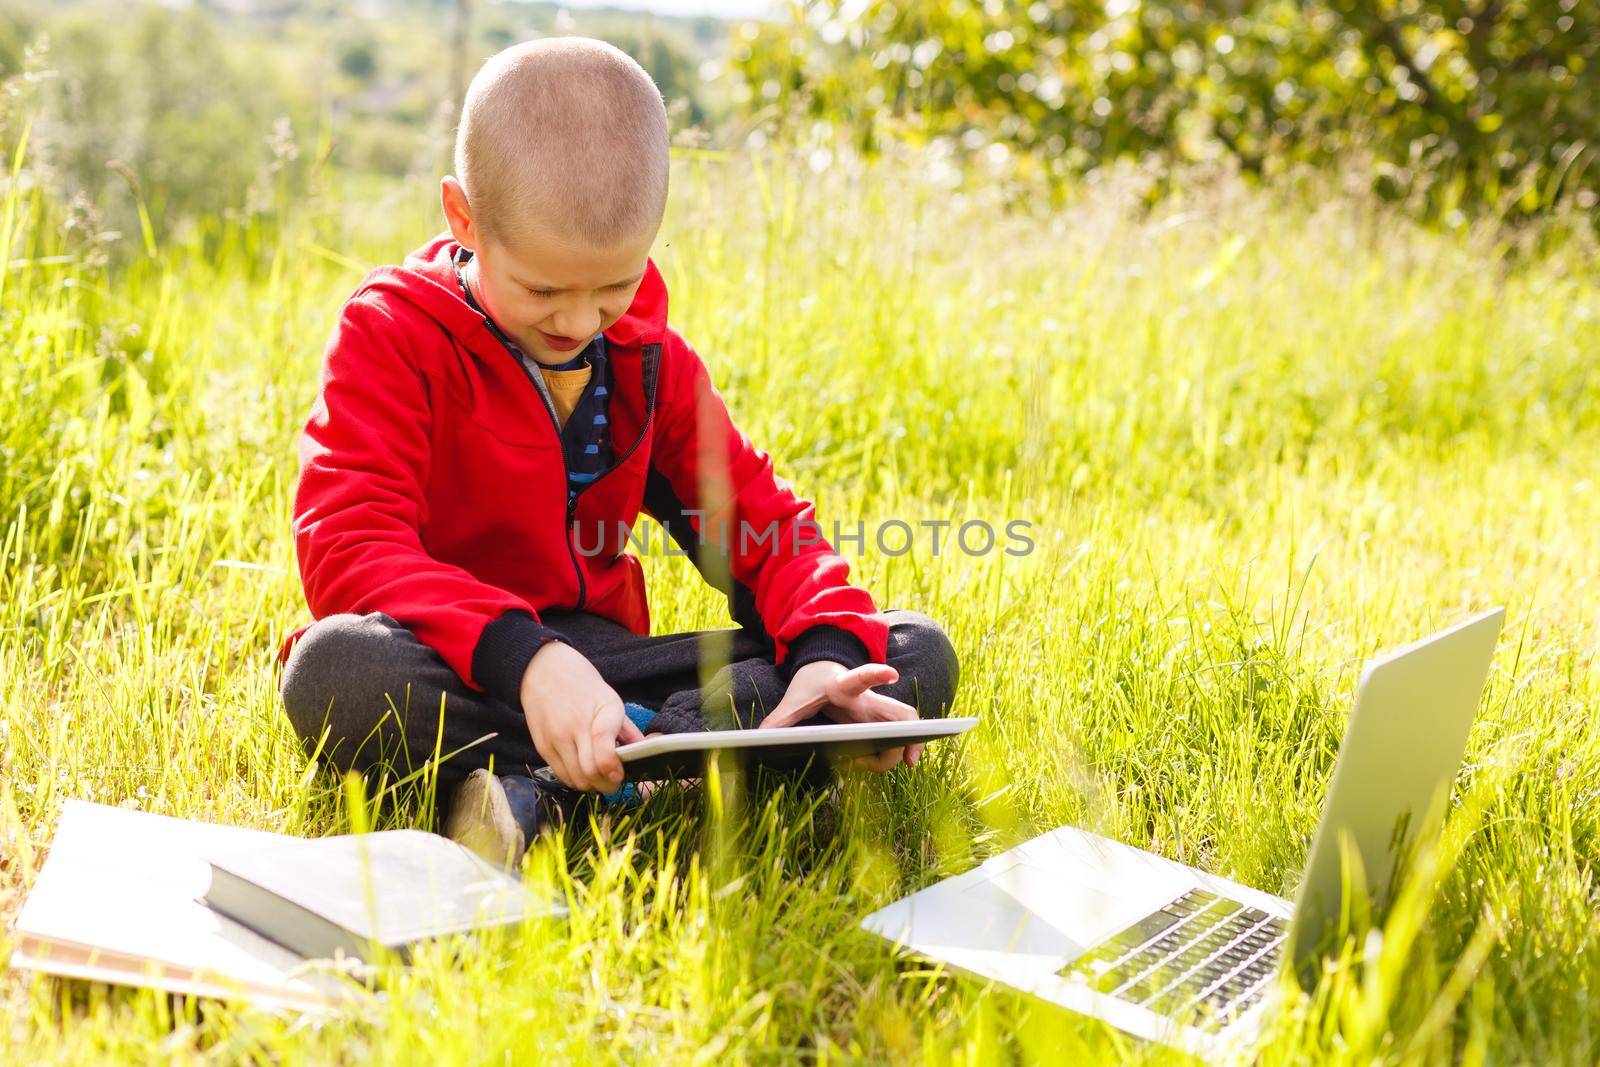 Distance learning. Boy learns autdoor laptop. Doing homework on grass. The child learns in the fresh air. The child's hands and computer